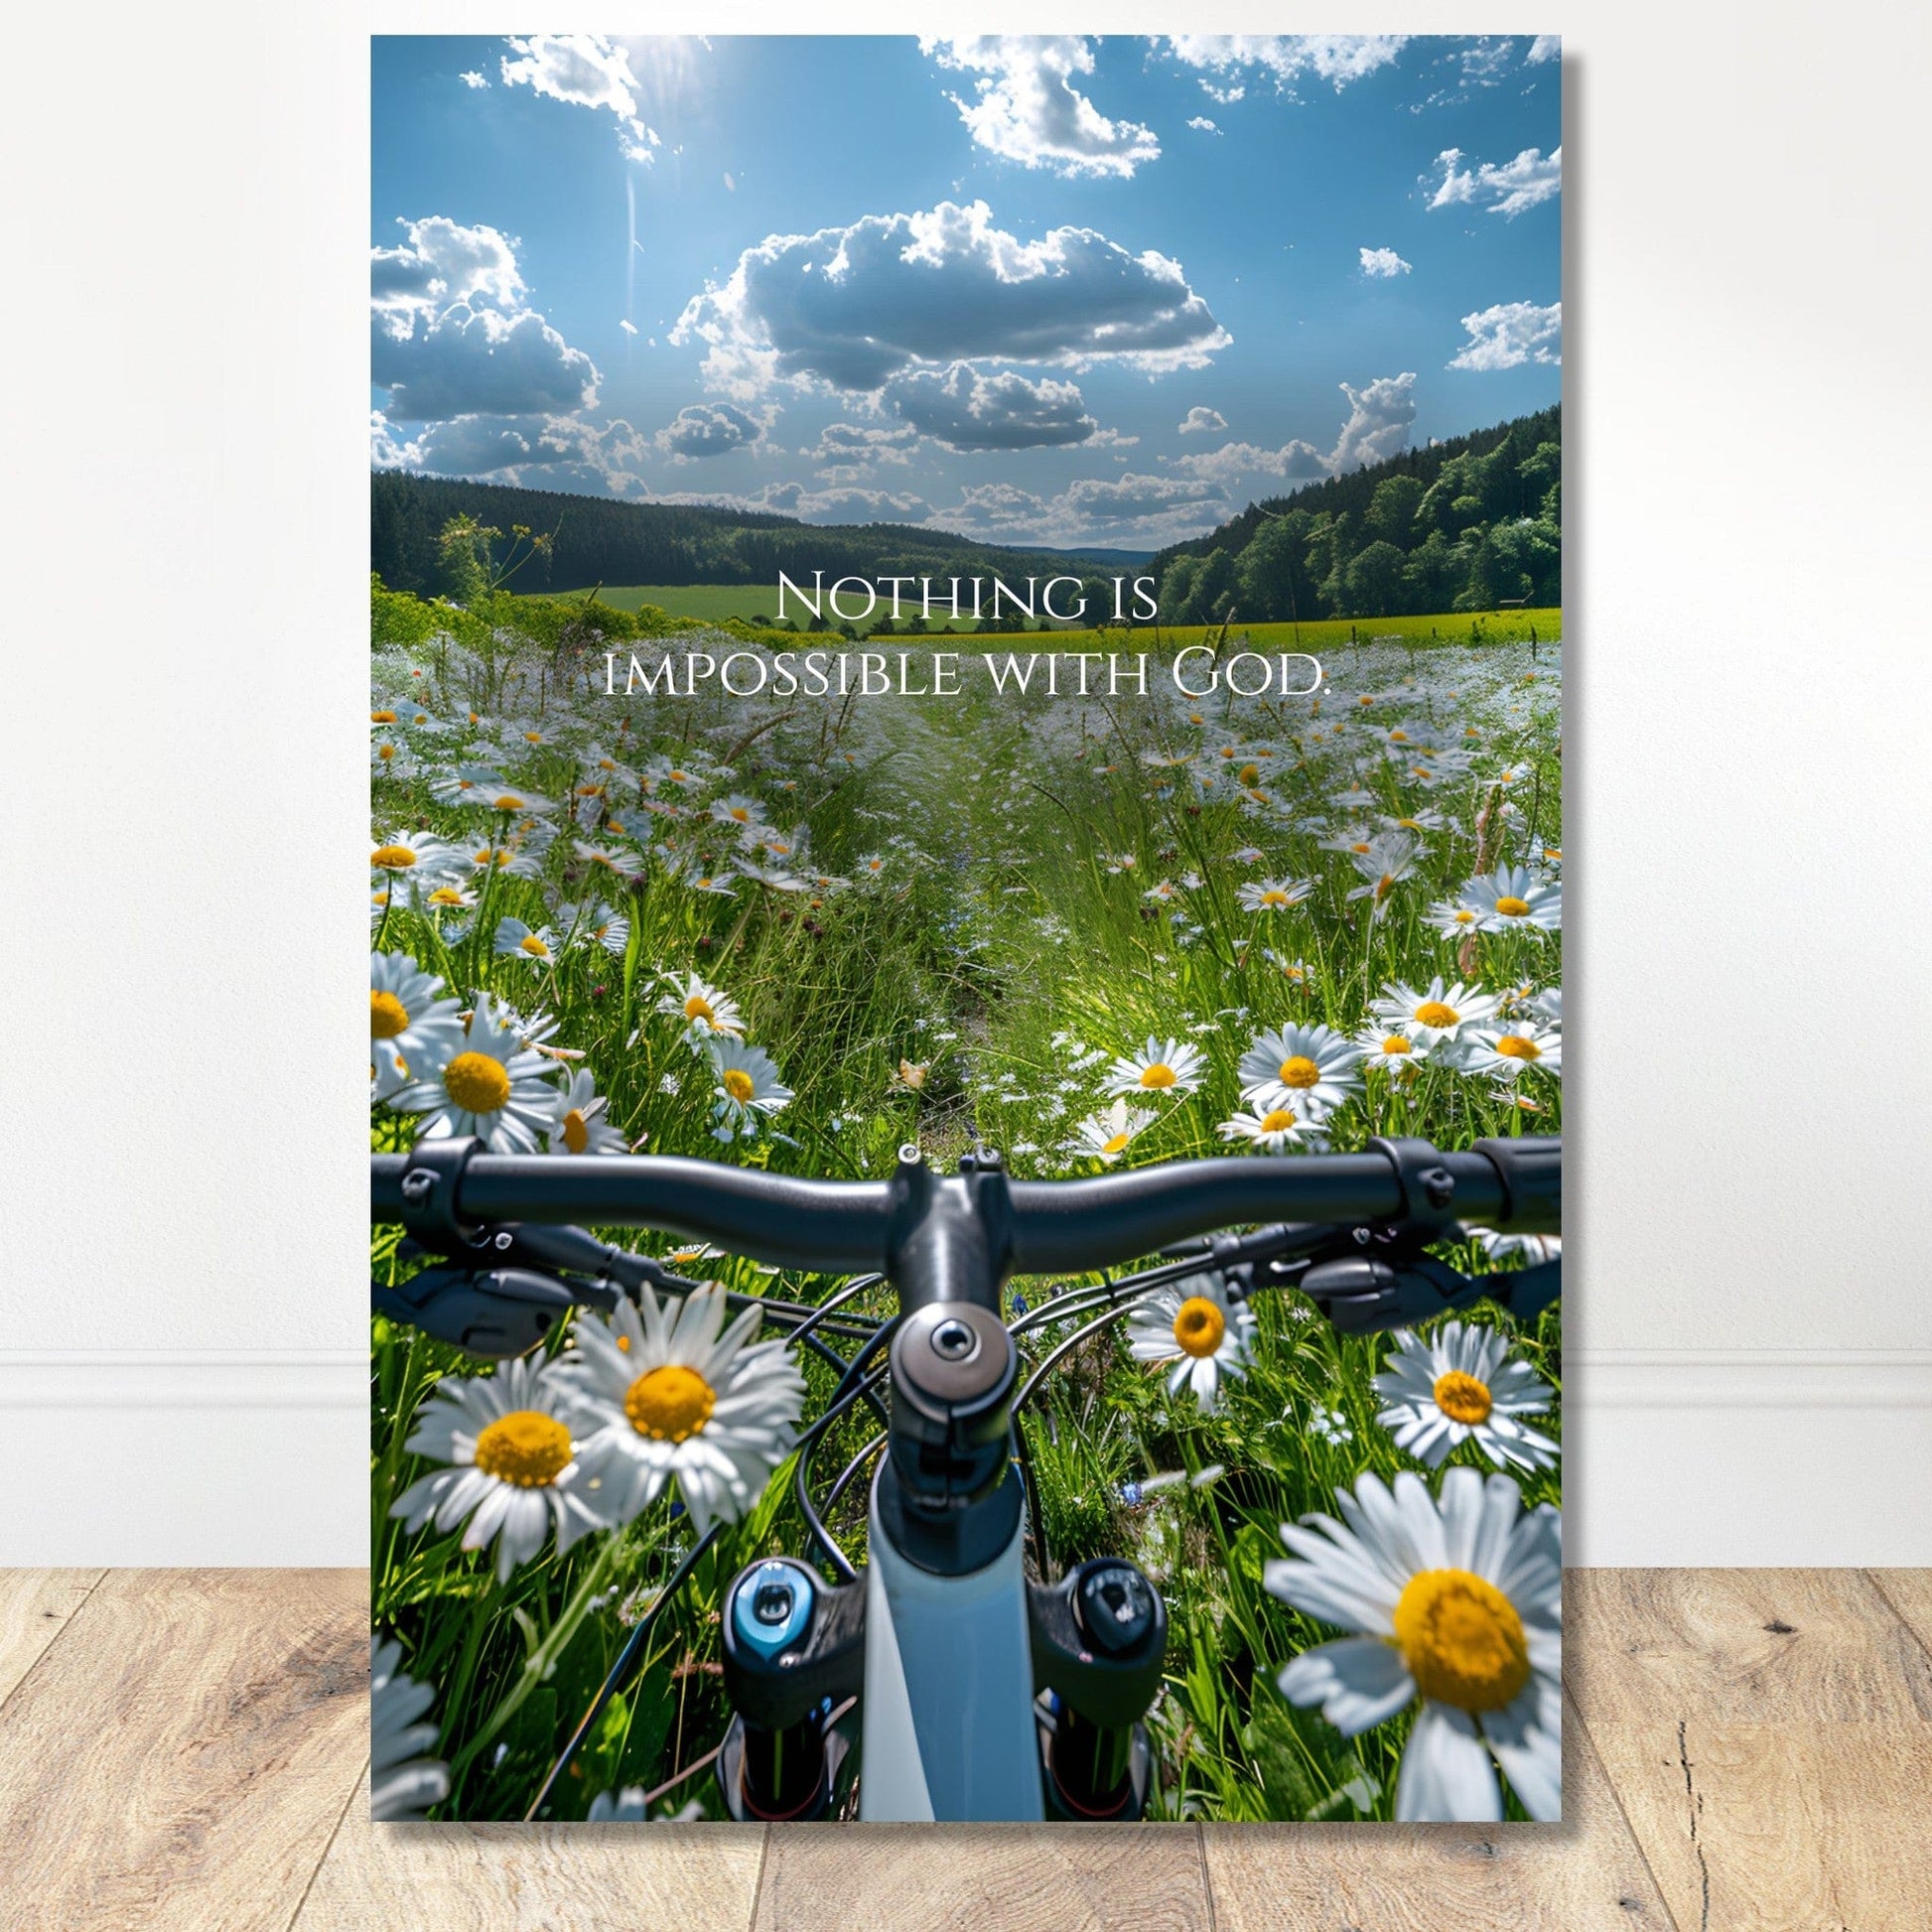 Coffee With My Father Print Material 60x90 cm / 24x36″ / Premium Matte Paper Poster / - Nothing is Impossible With God - Artwork